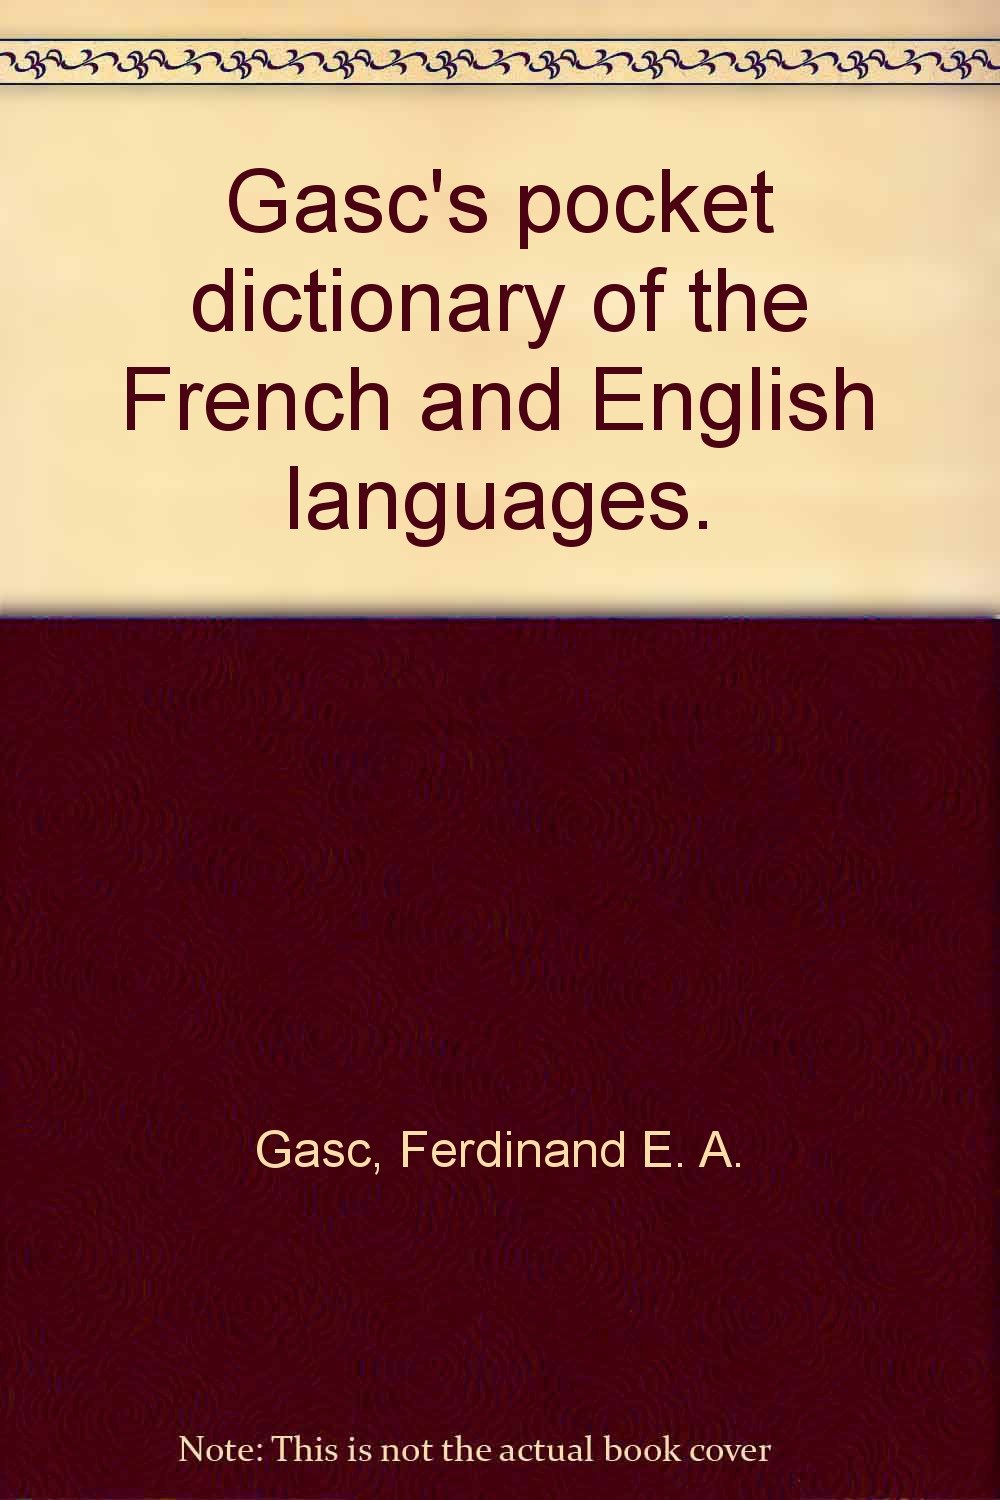 Gasc's pocket dictionary of the French and English languages. [Hardcover] Gasc, Ferdinand E. A.